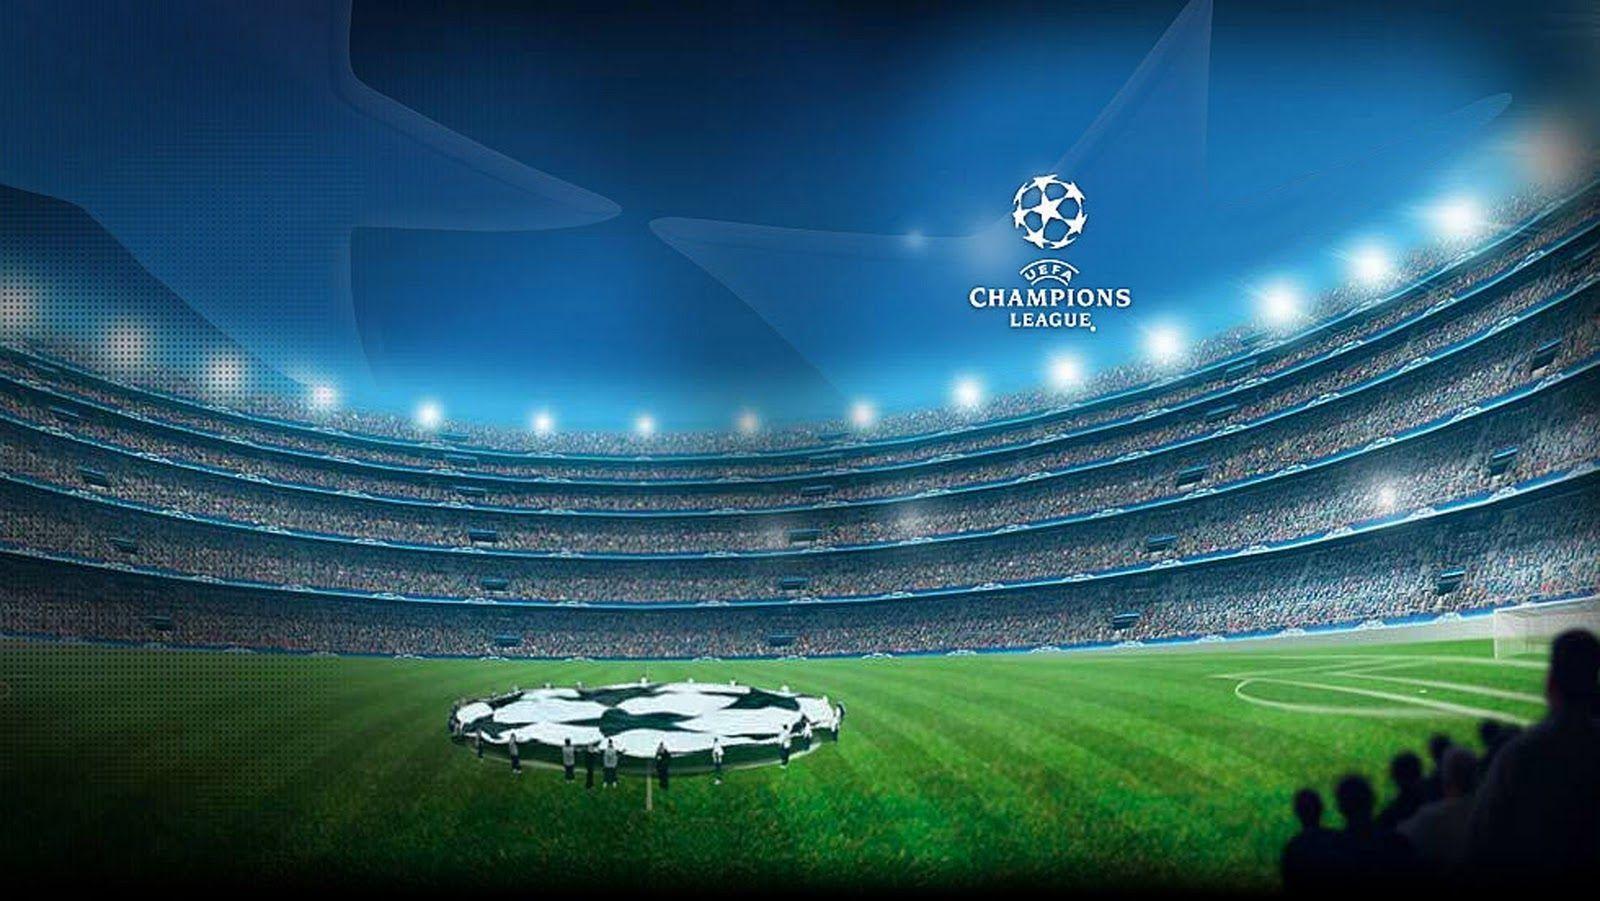 download sports champions league